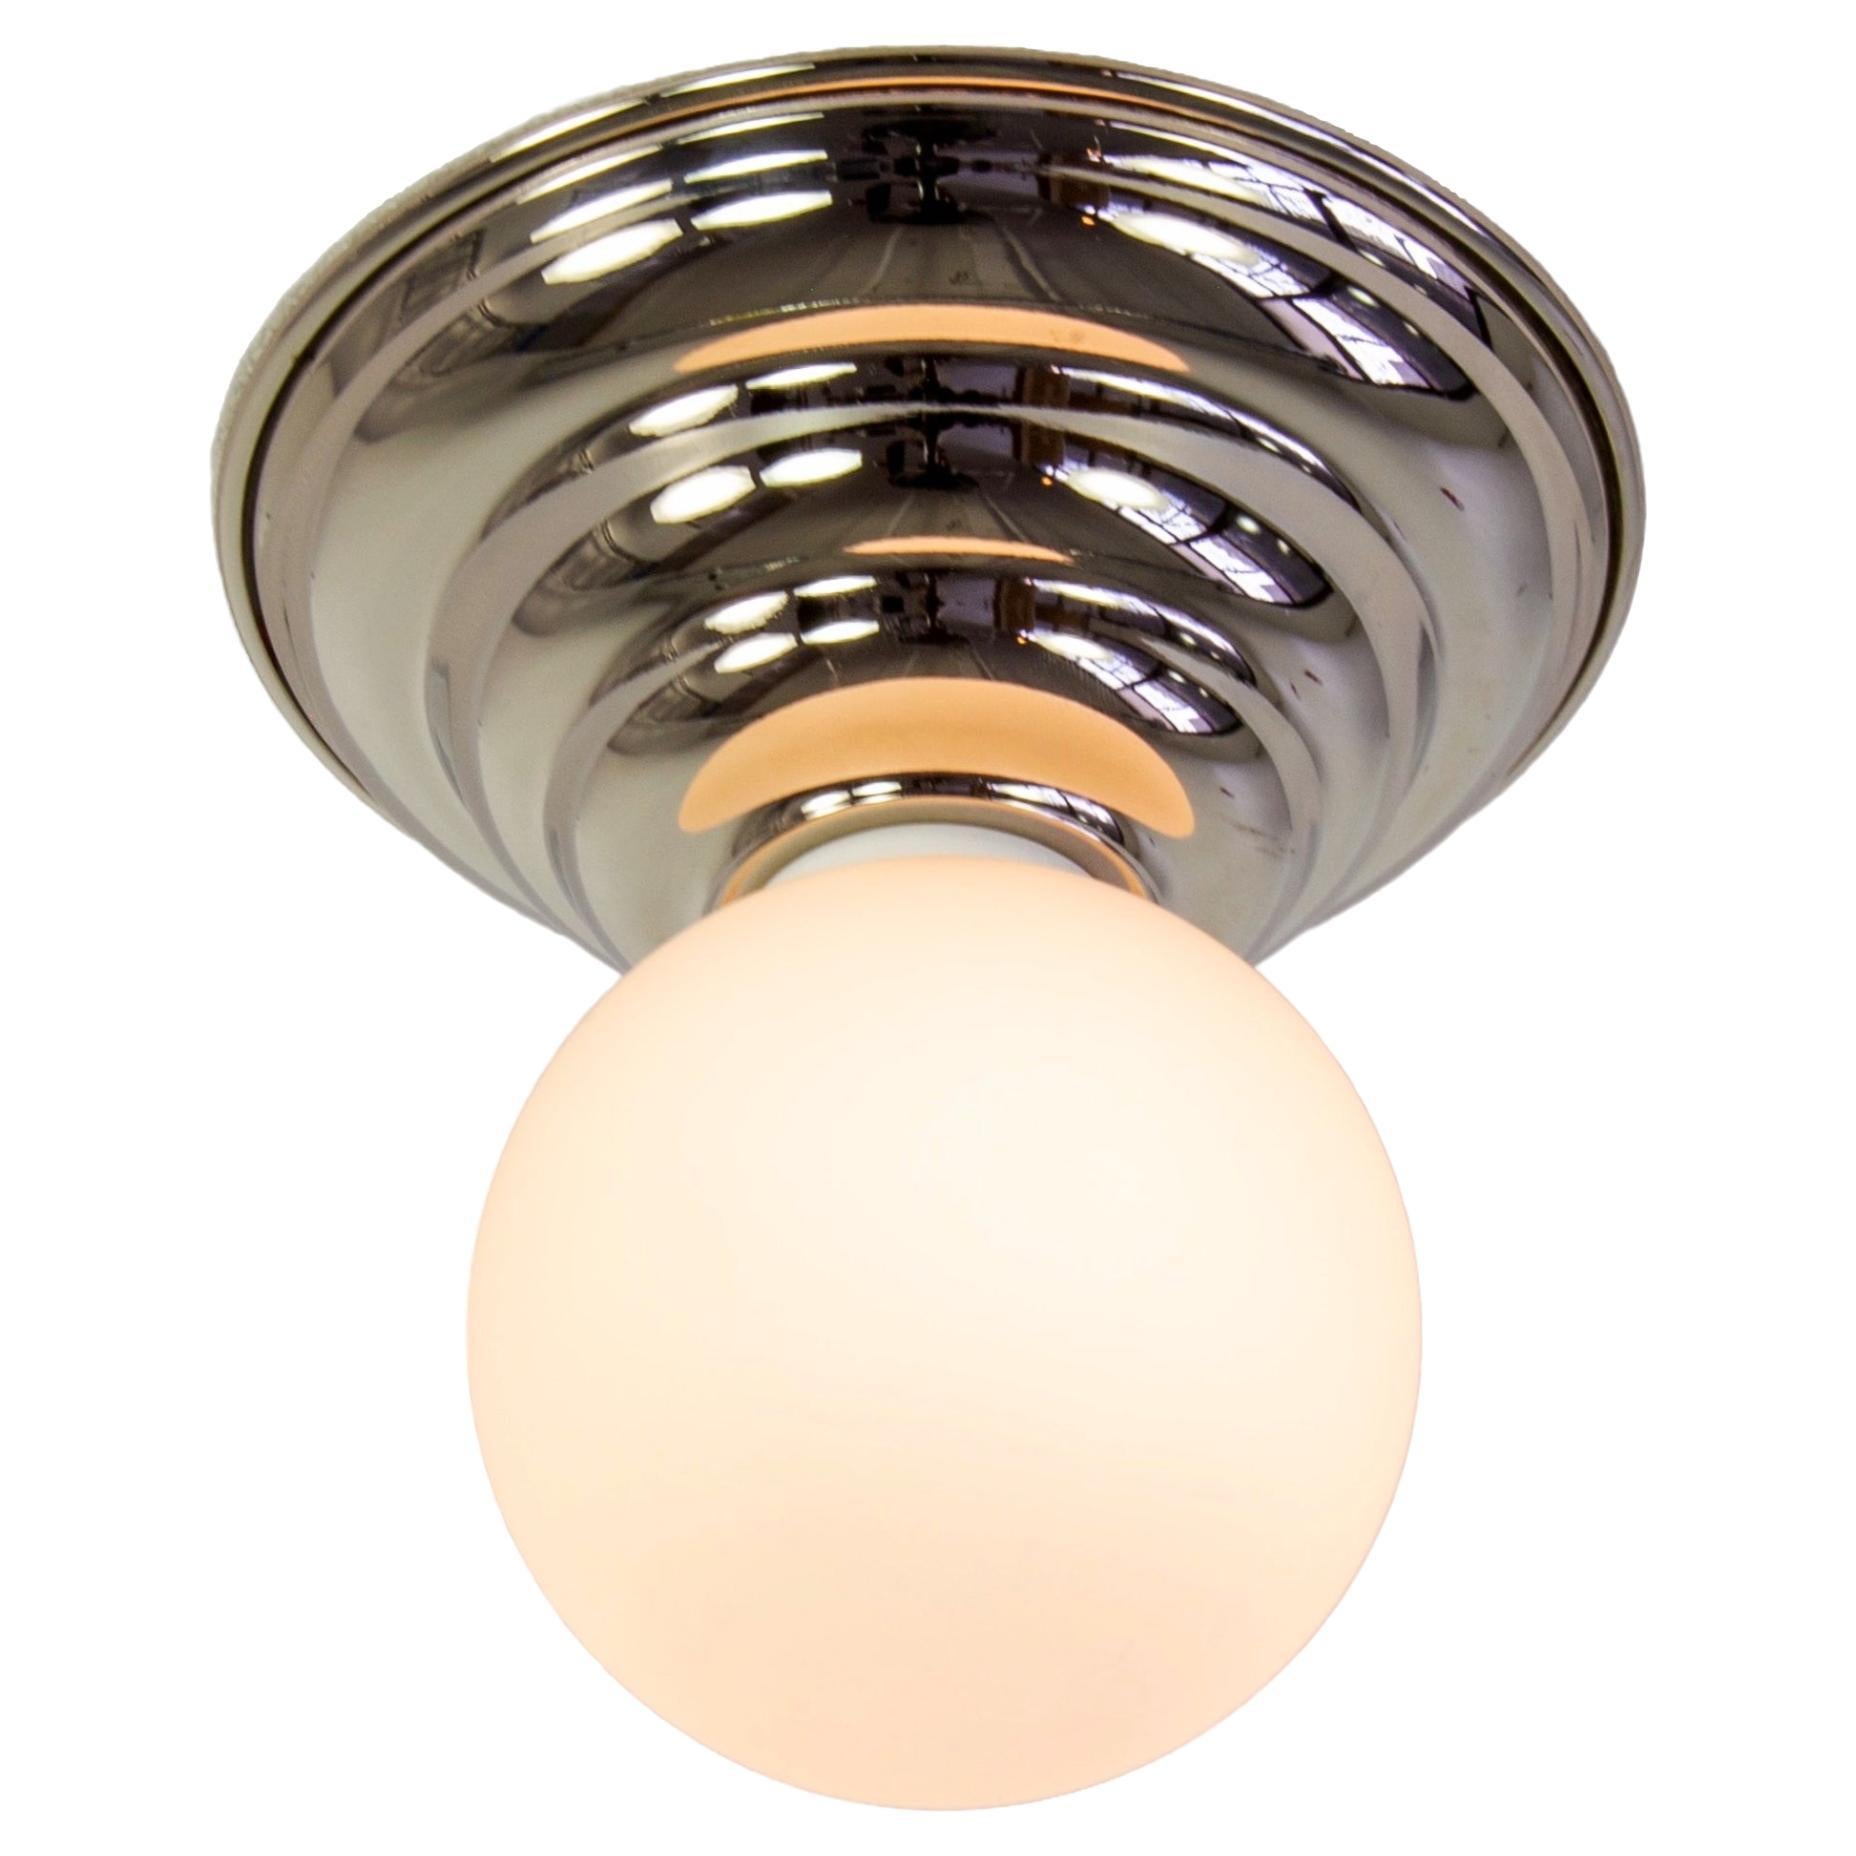 Hive Flush Mount by Research.Lighting, Polished Nickel, Made to Order